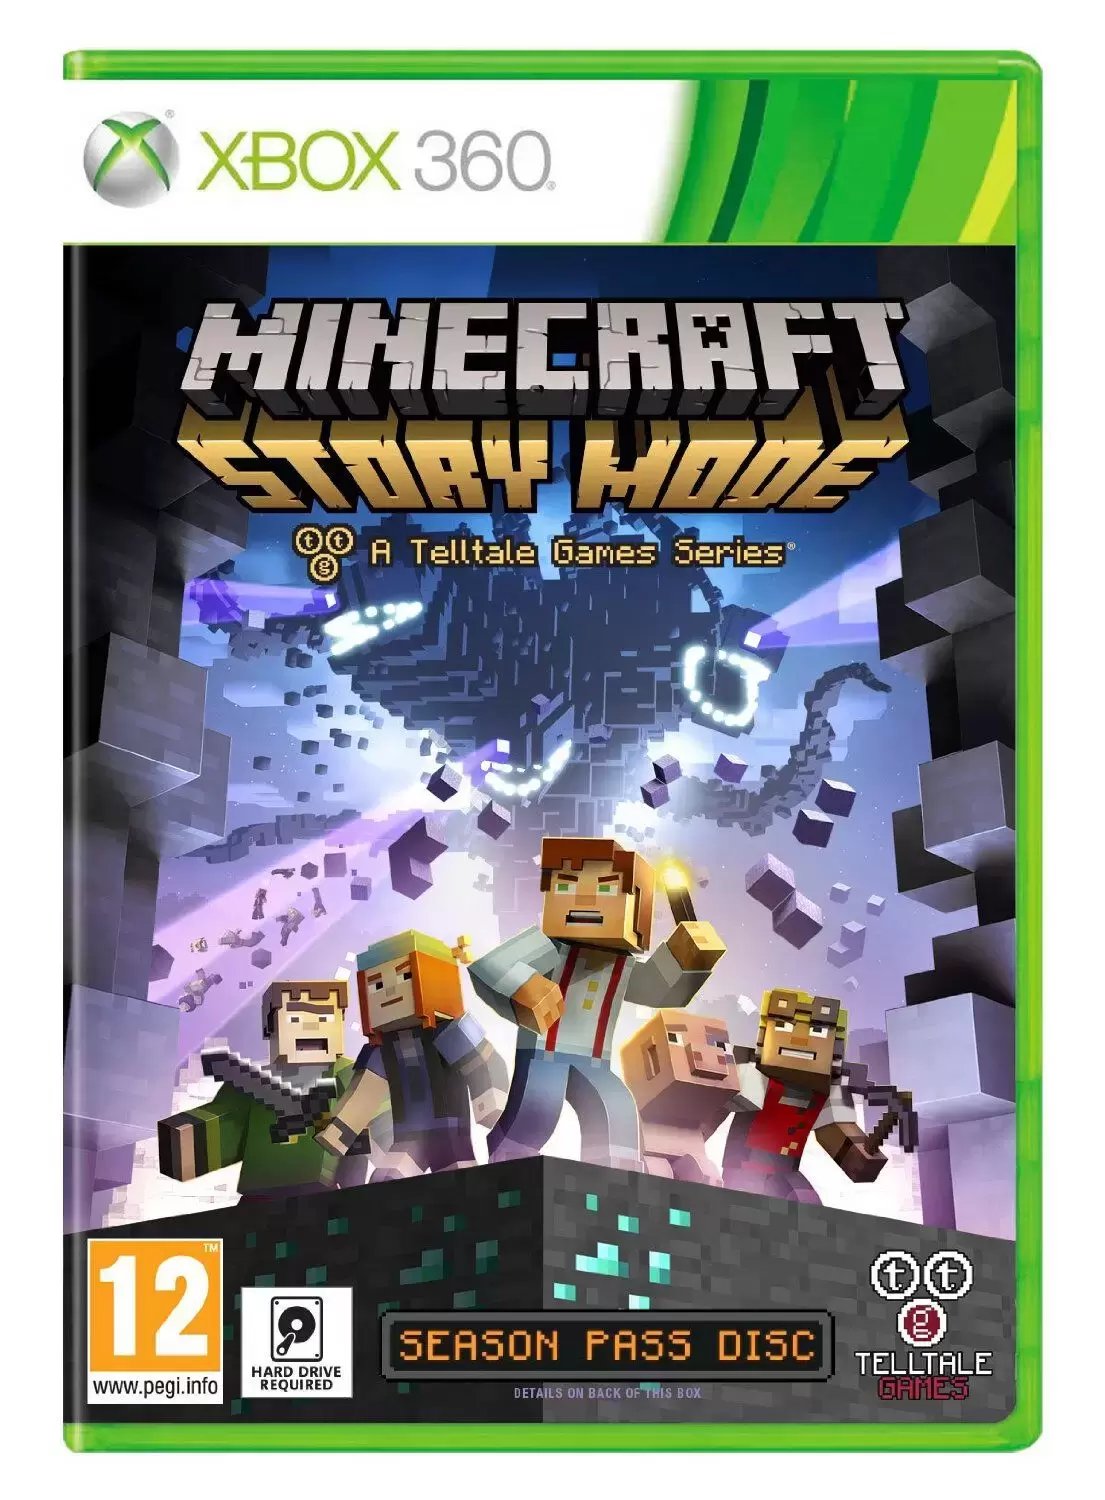 XBOX 360 Games - Minecraft Story Mode